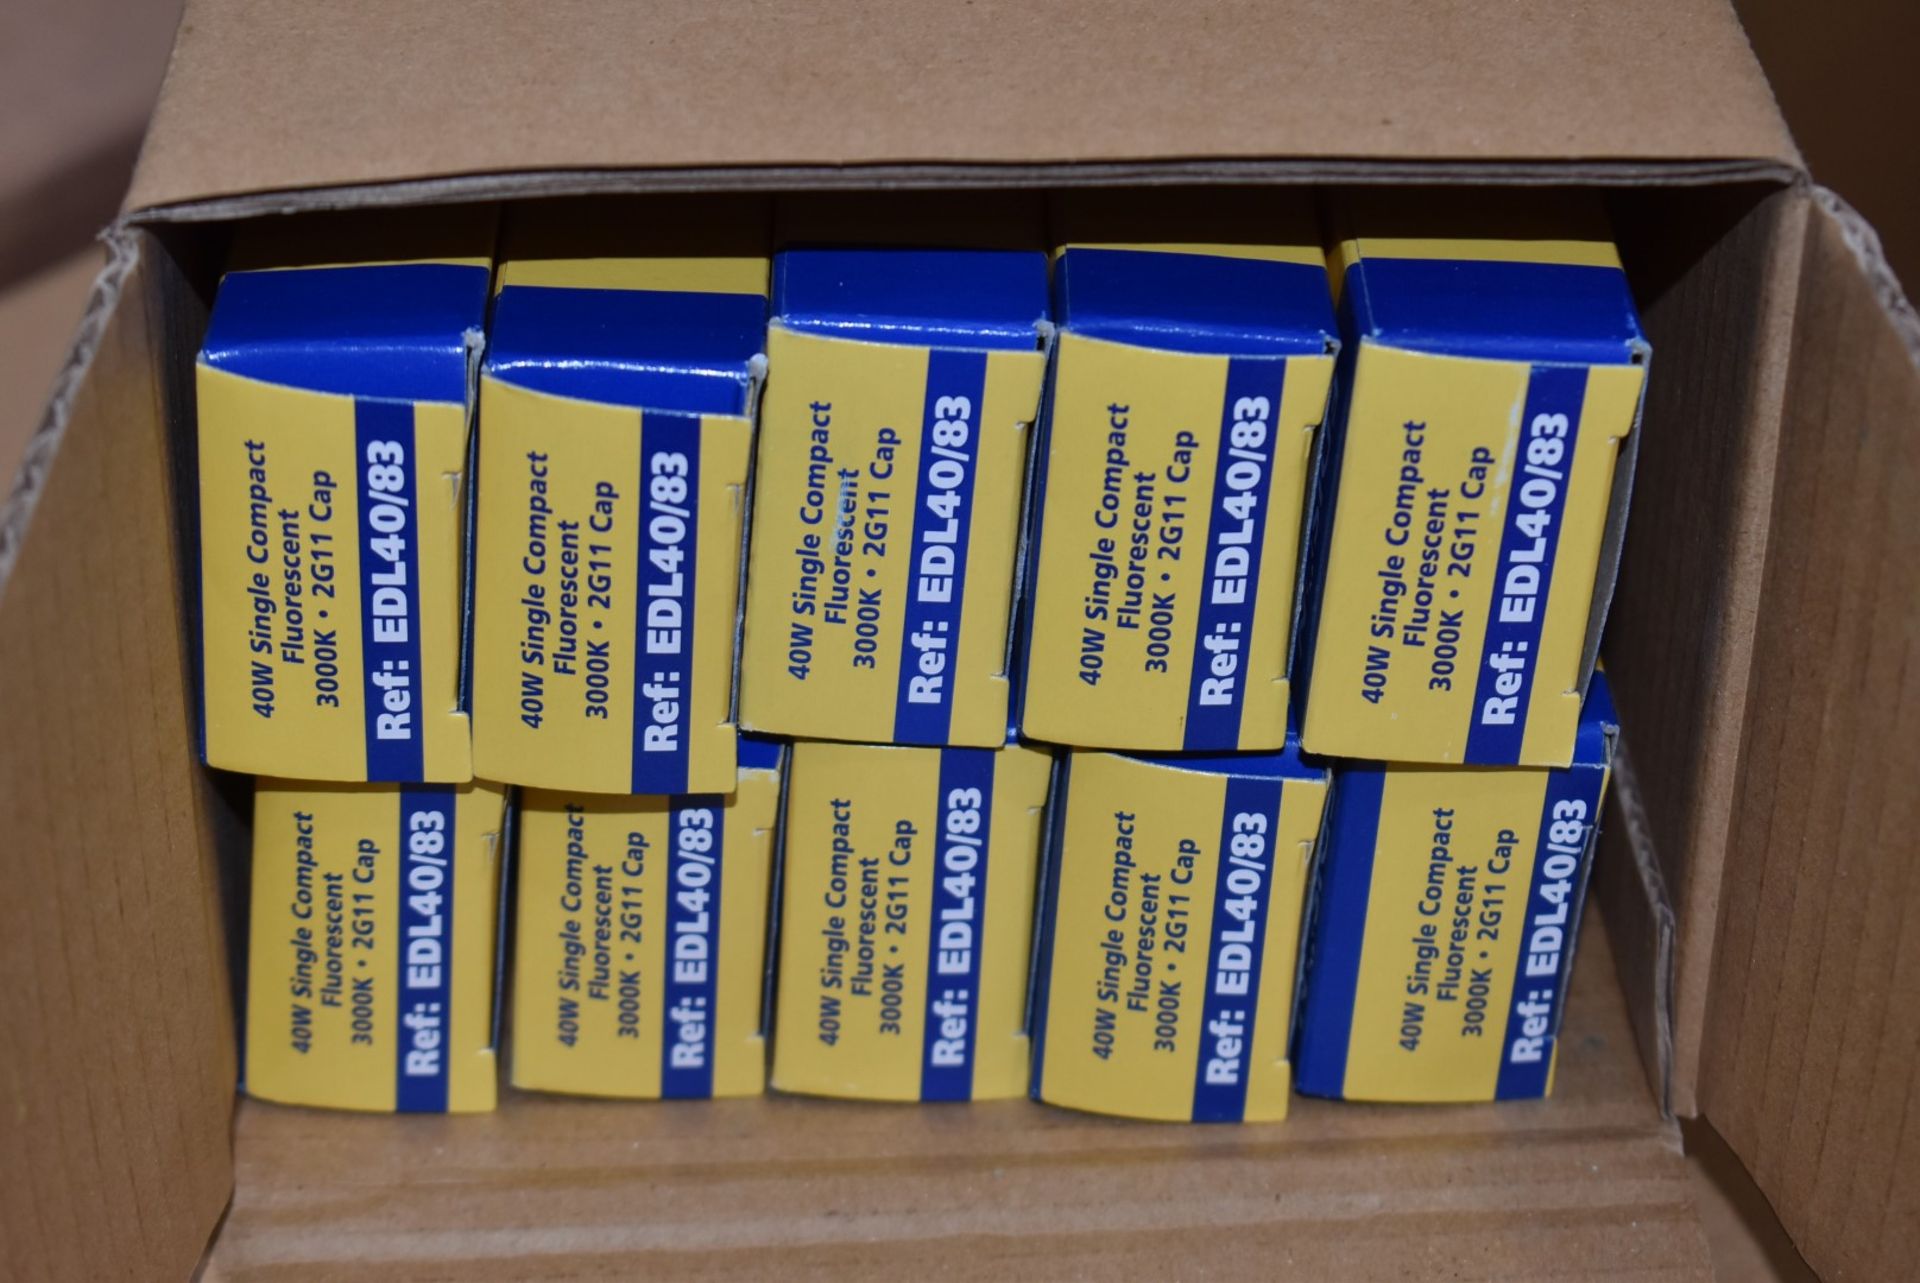 10 x Edison 40W 2G11 4 Pin Long Compact 3000K Fluorescent Lamps - New Boxed Stock - RRP £70 - Image 4 of 7